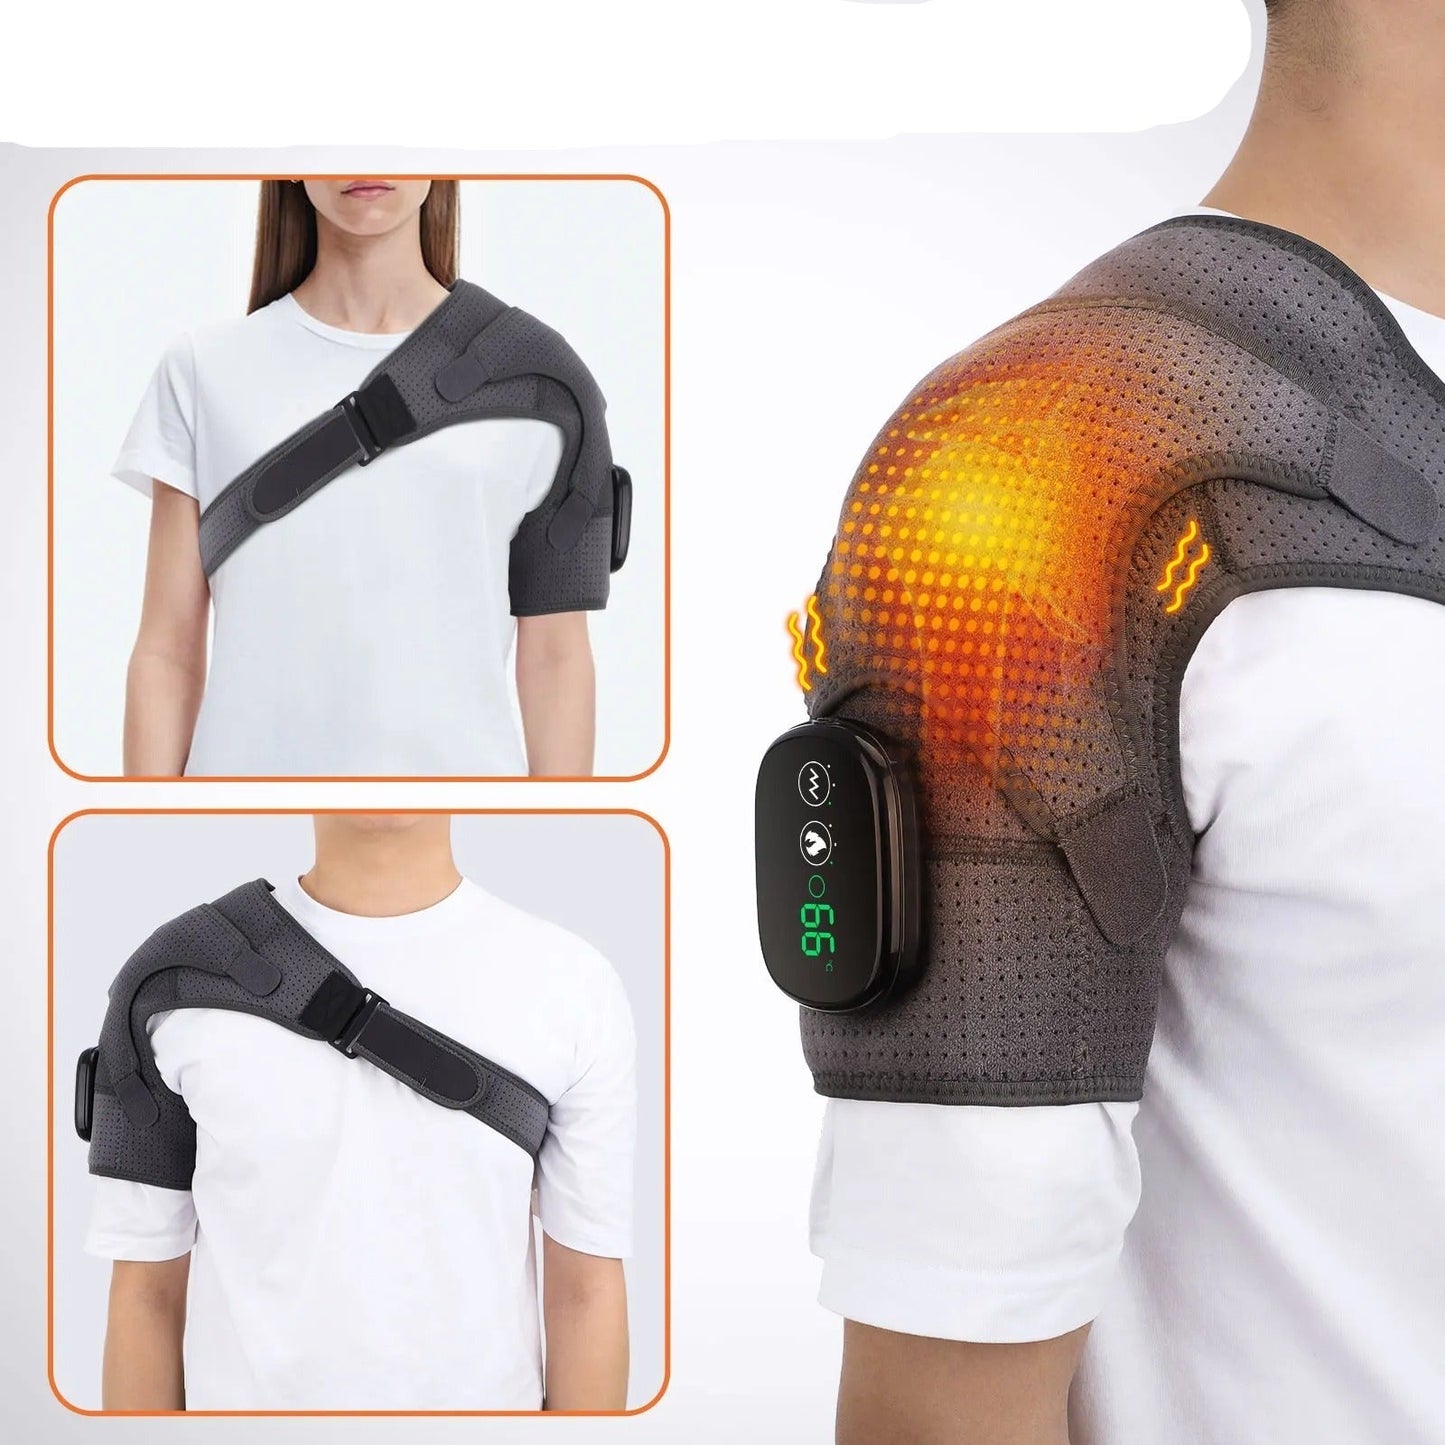 Heated Shoulder Wrap with Vibration - Cordless Shoulder Heating Pad for Men and Women